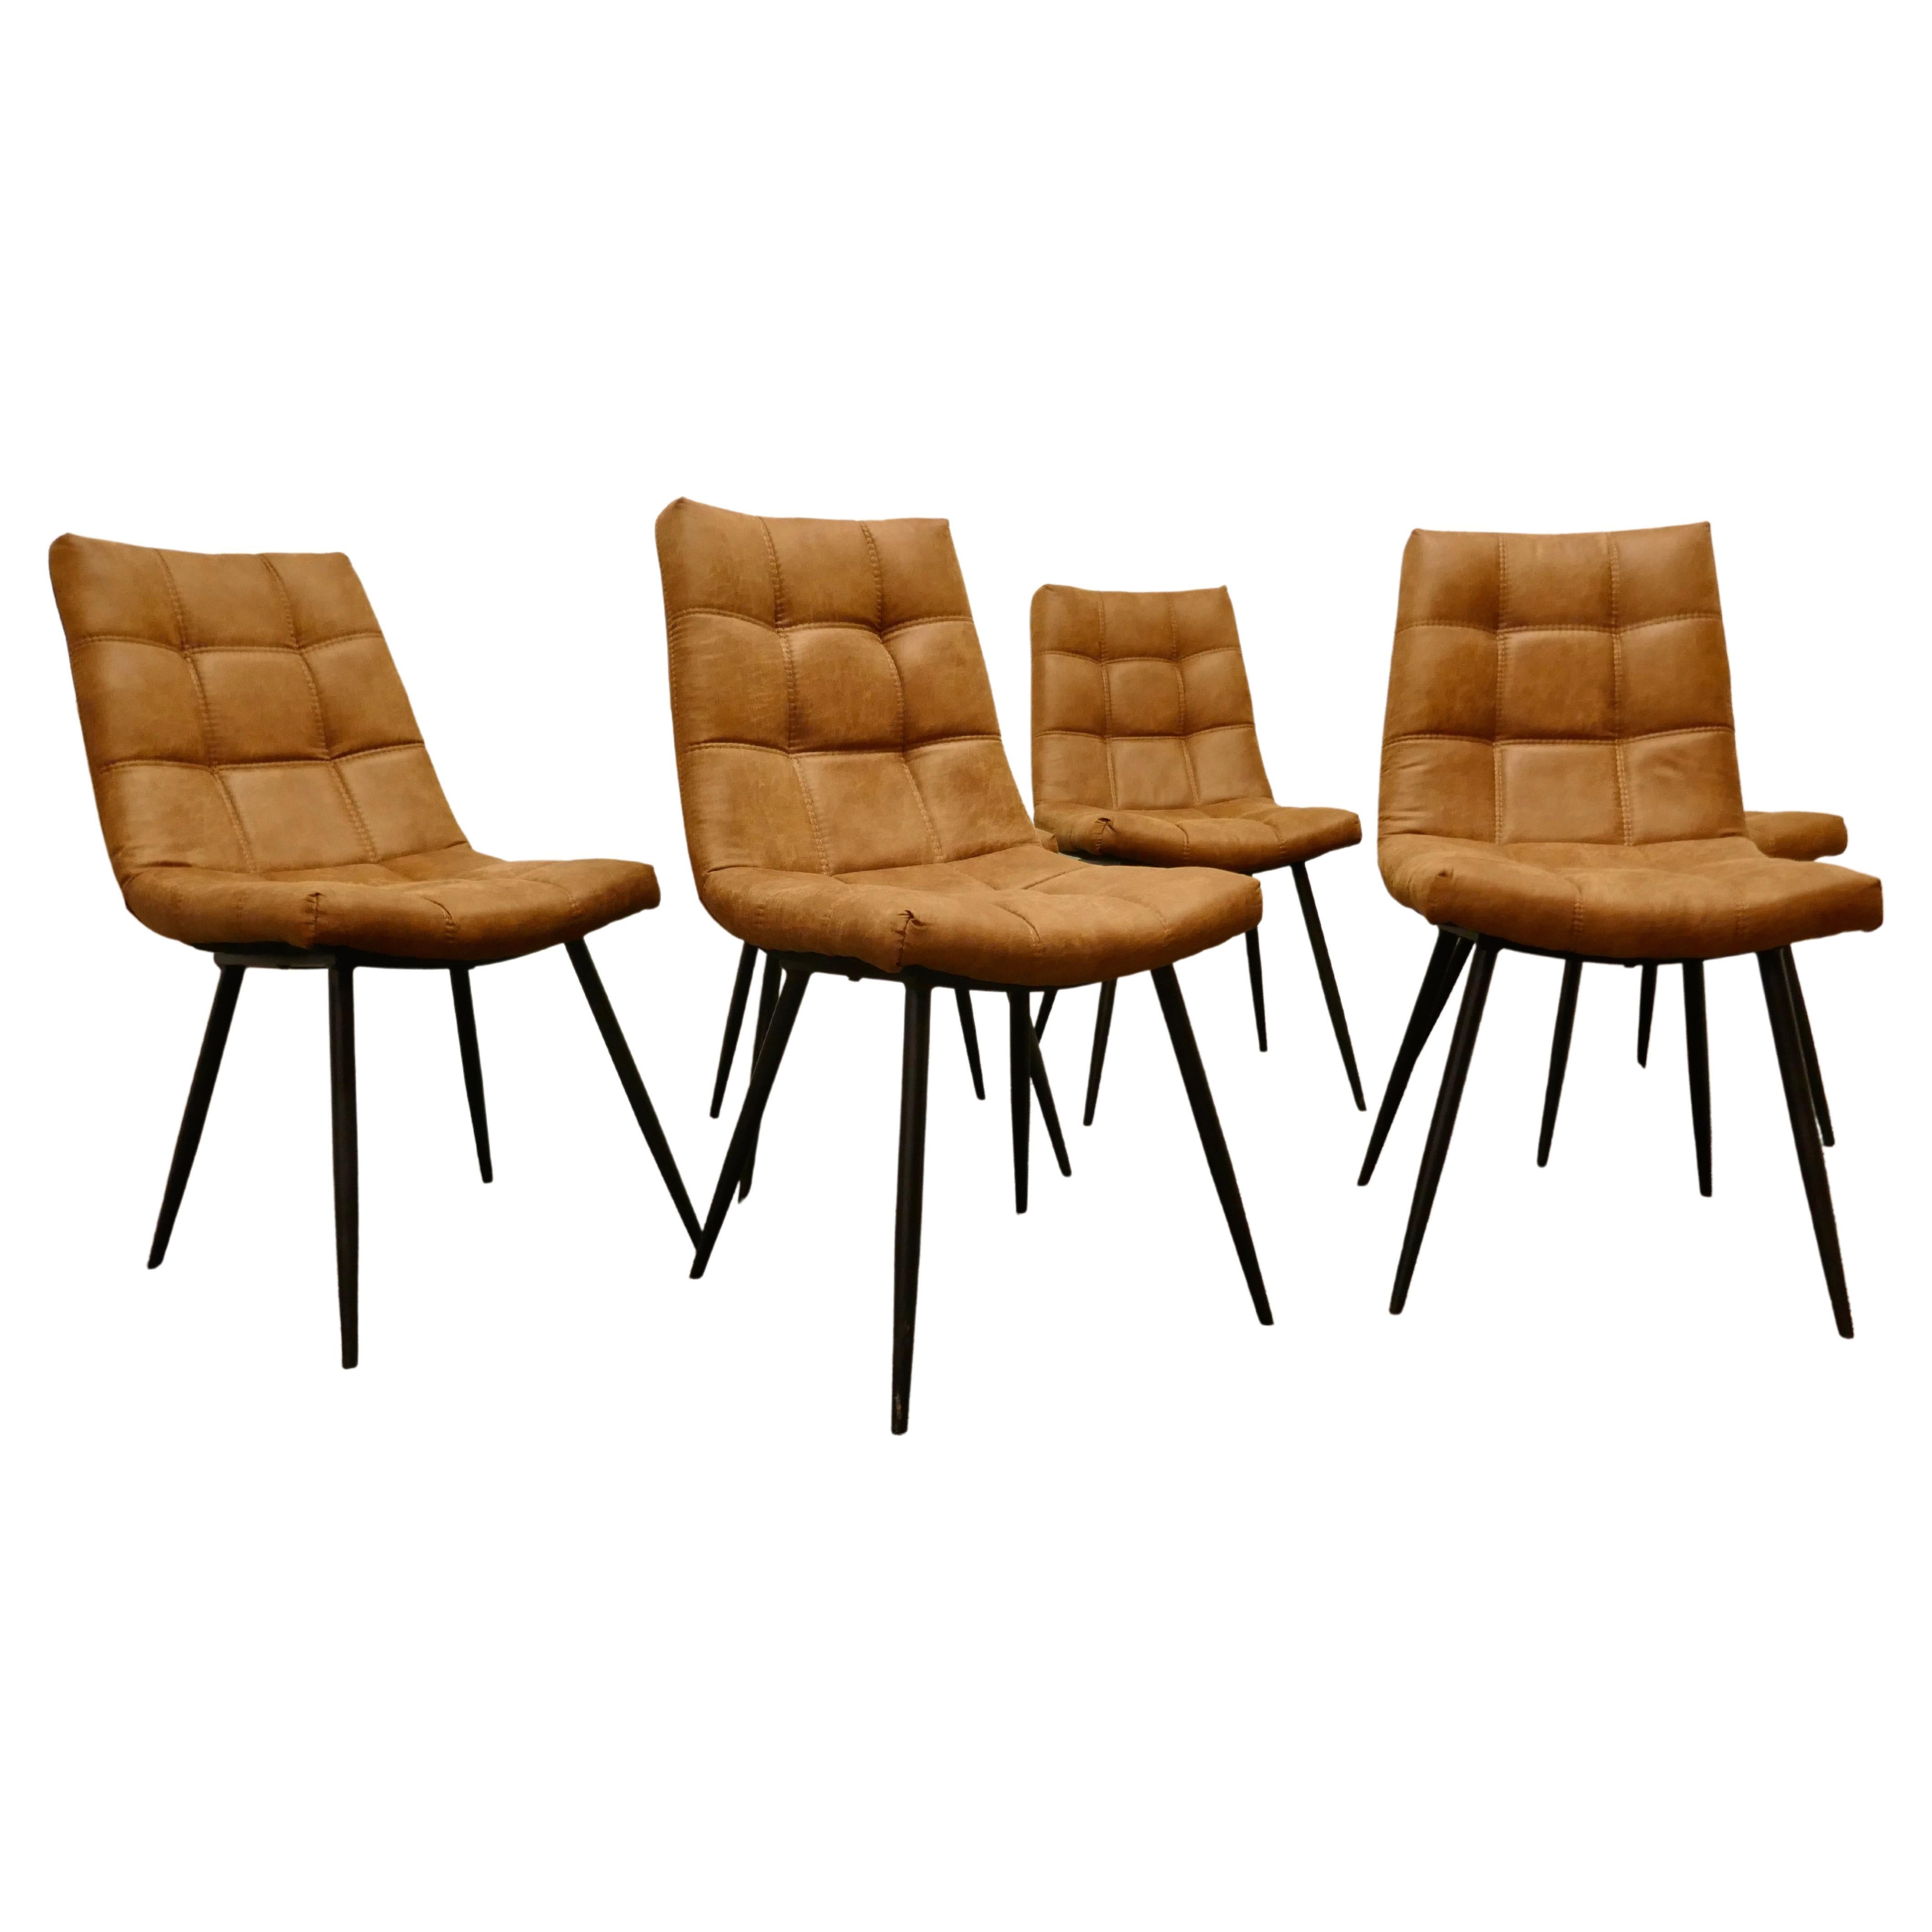 Set of 6 Mid Century Dining Chairs Upholstered in Suede 